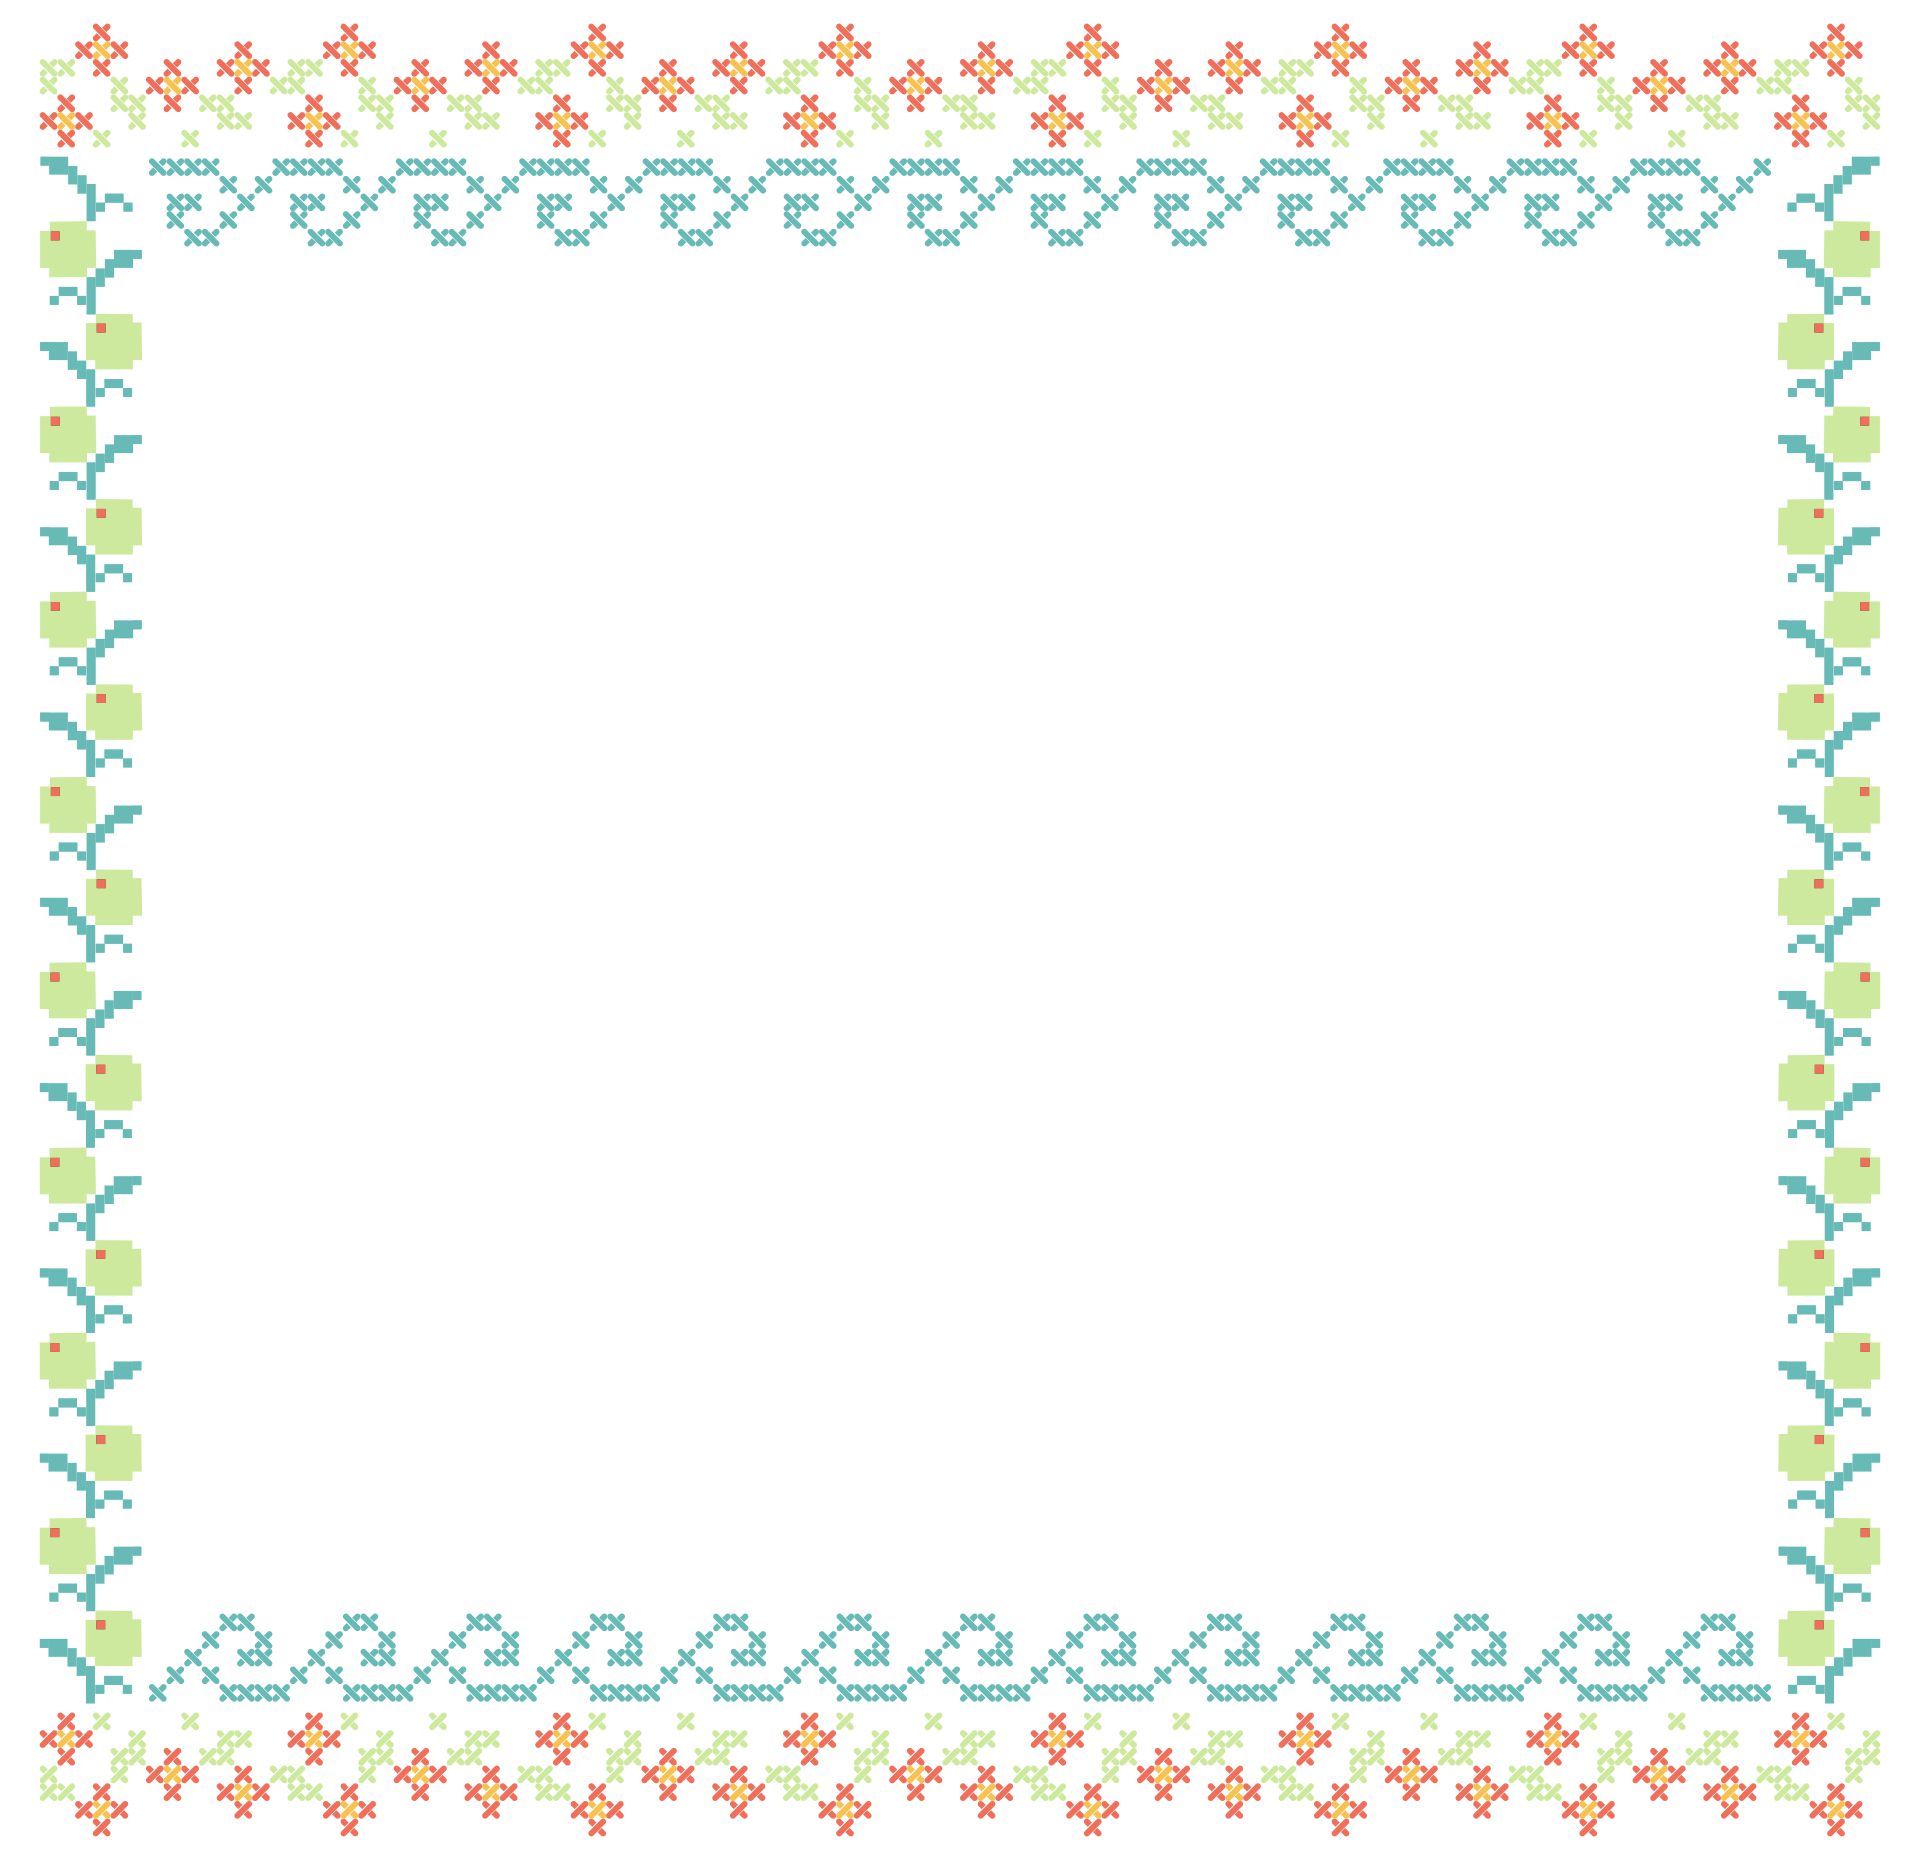 7-best-images-of-printable-cross-stitch-borders-free-cross-stitch-patterns-borders-counted